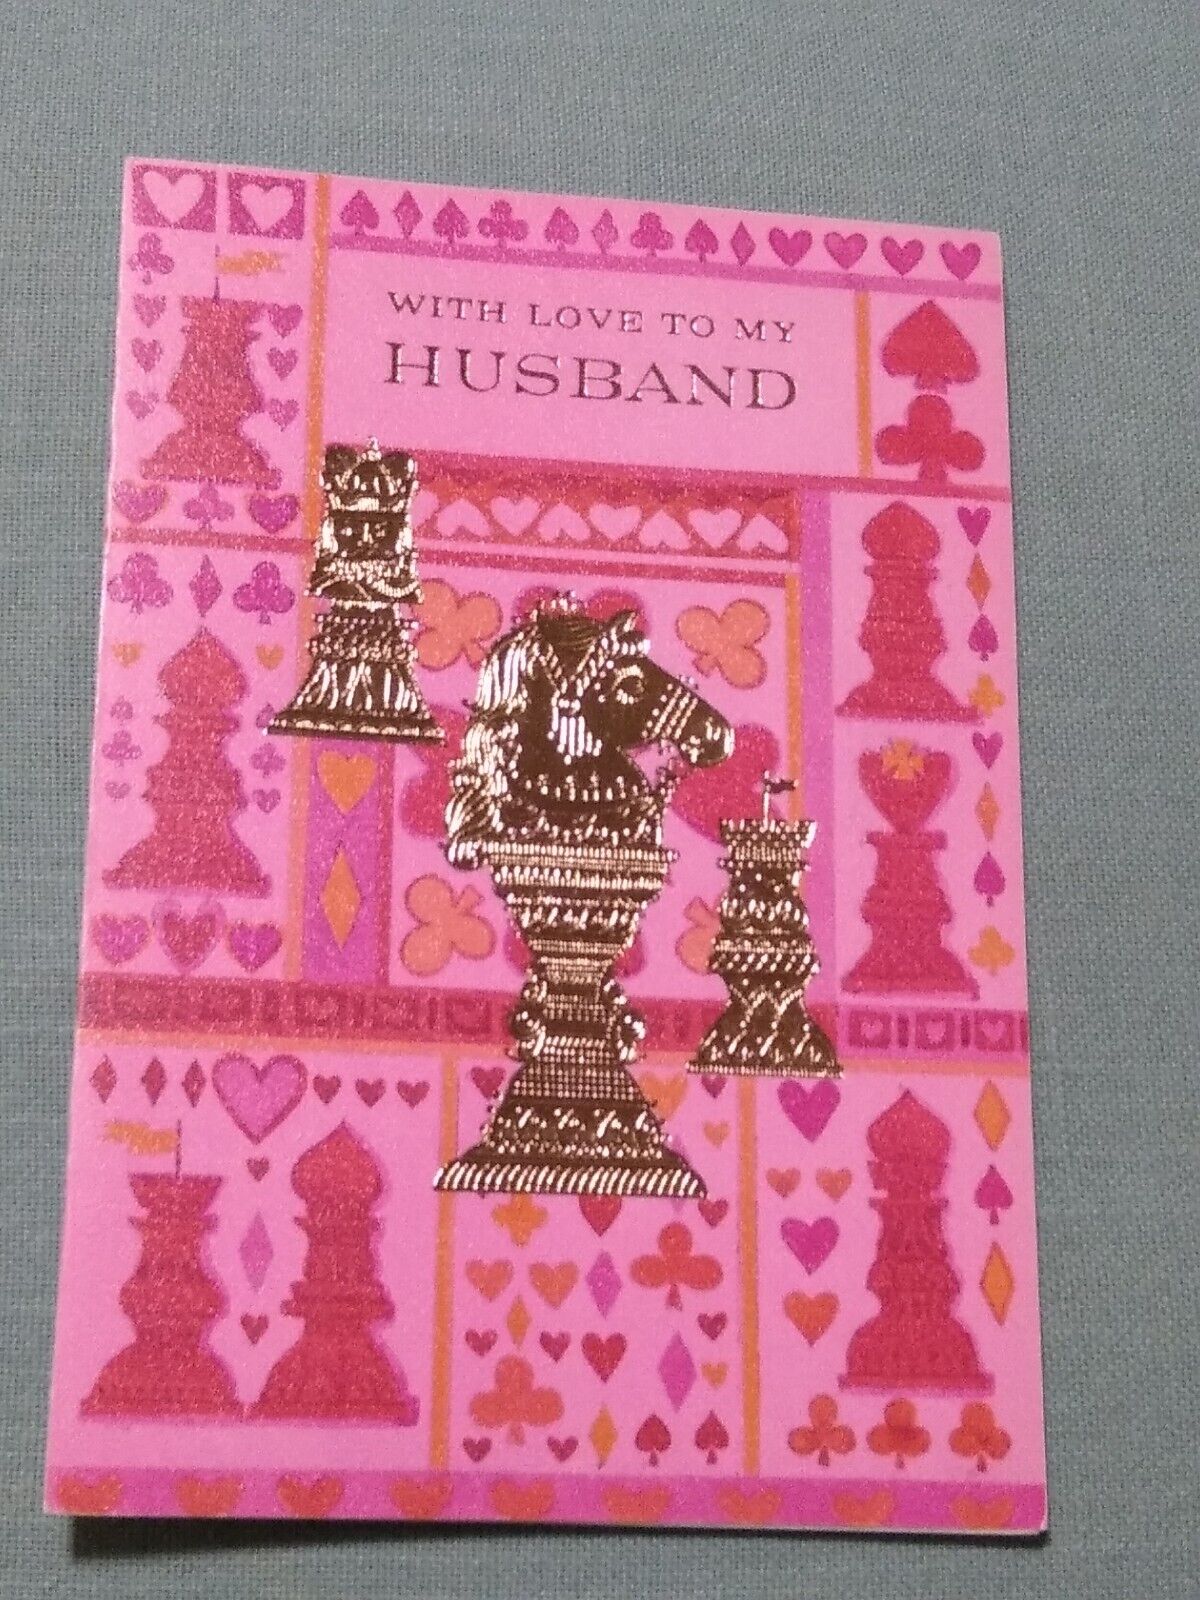 VTG AMERICAN GREETINGS LOVE TO MY HUSBAND GOLD EMBOSSED CHESS VALENTINES CARD